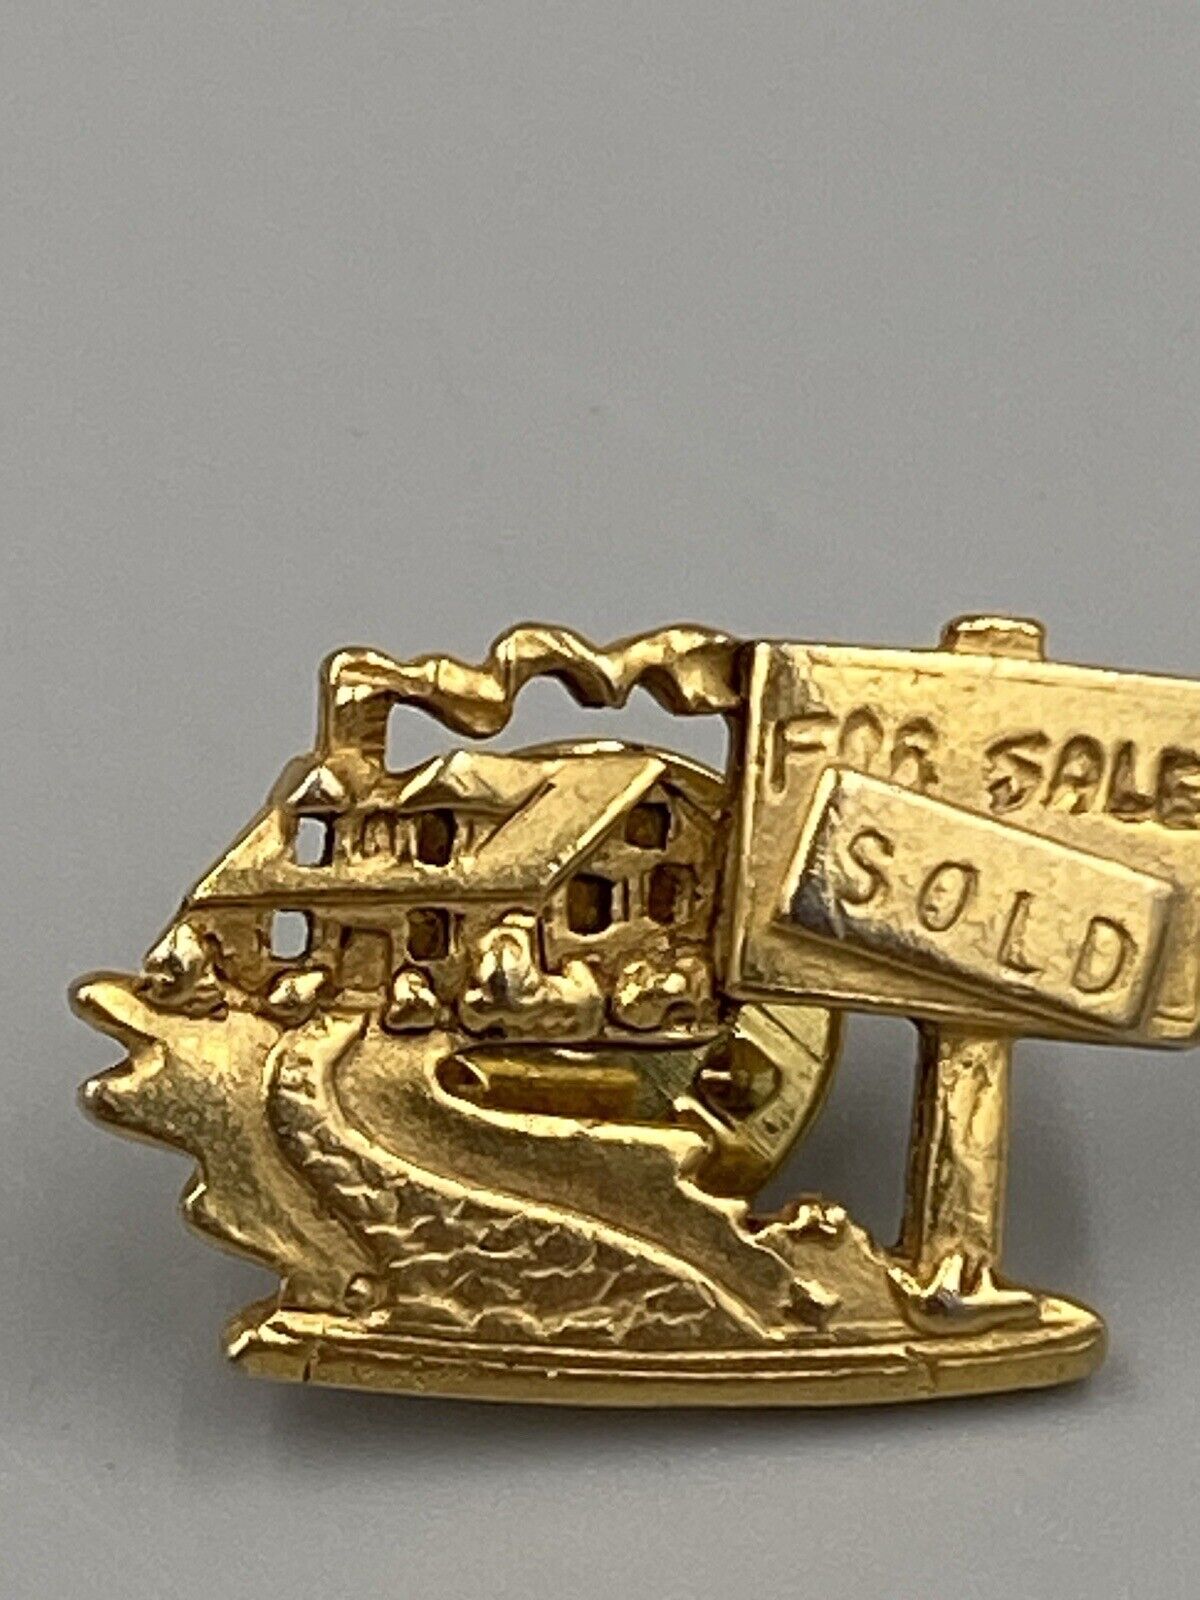 Vintage AJC SOLD House For Sale Real Estate Sign Realtor Gold Colored Lapel Pin